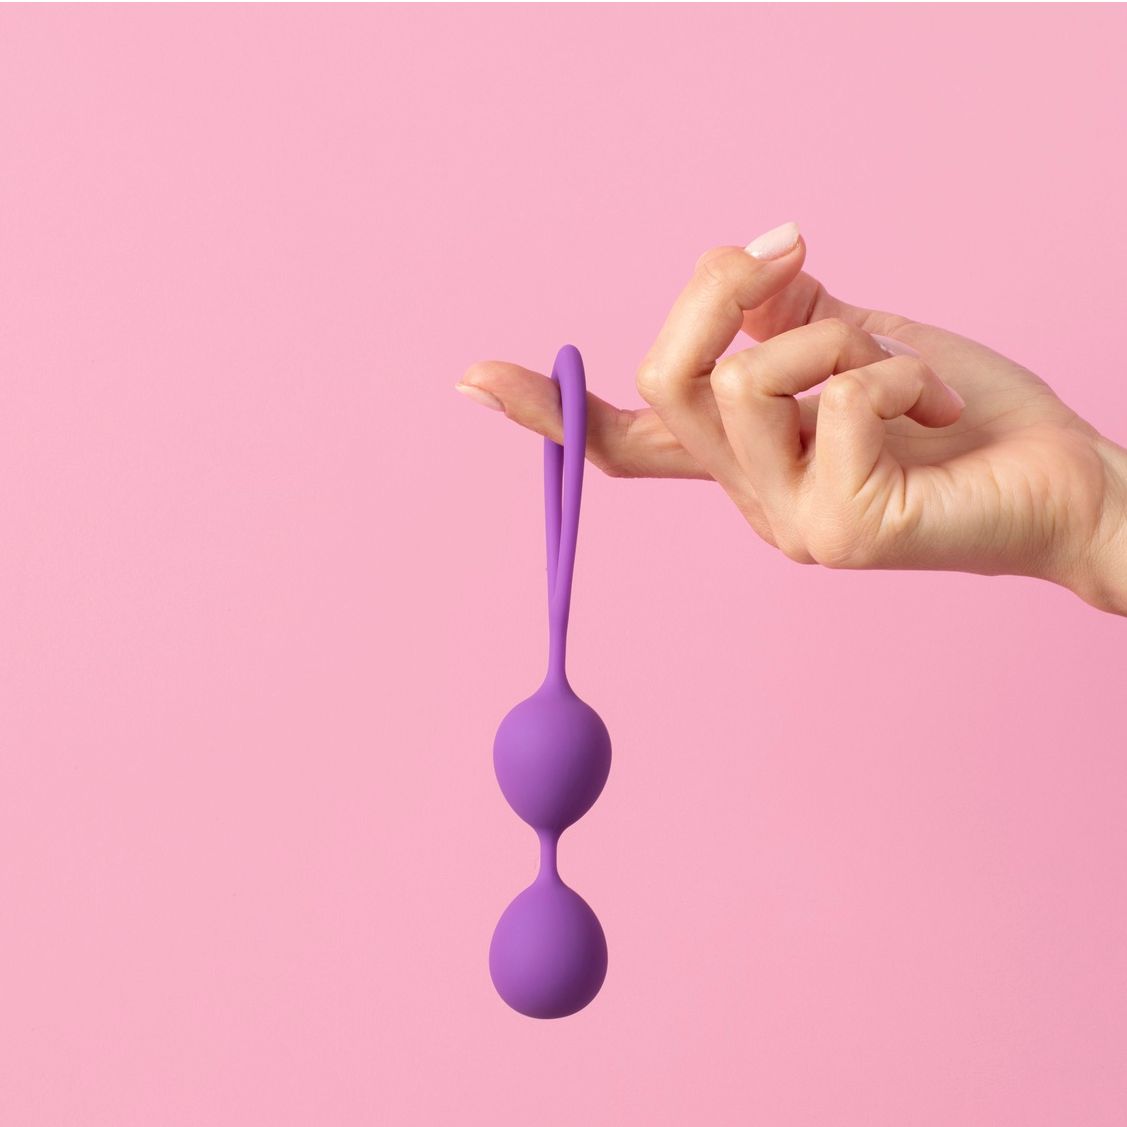 Purple Ben Wa balls hold by a woman finger on a pink background